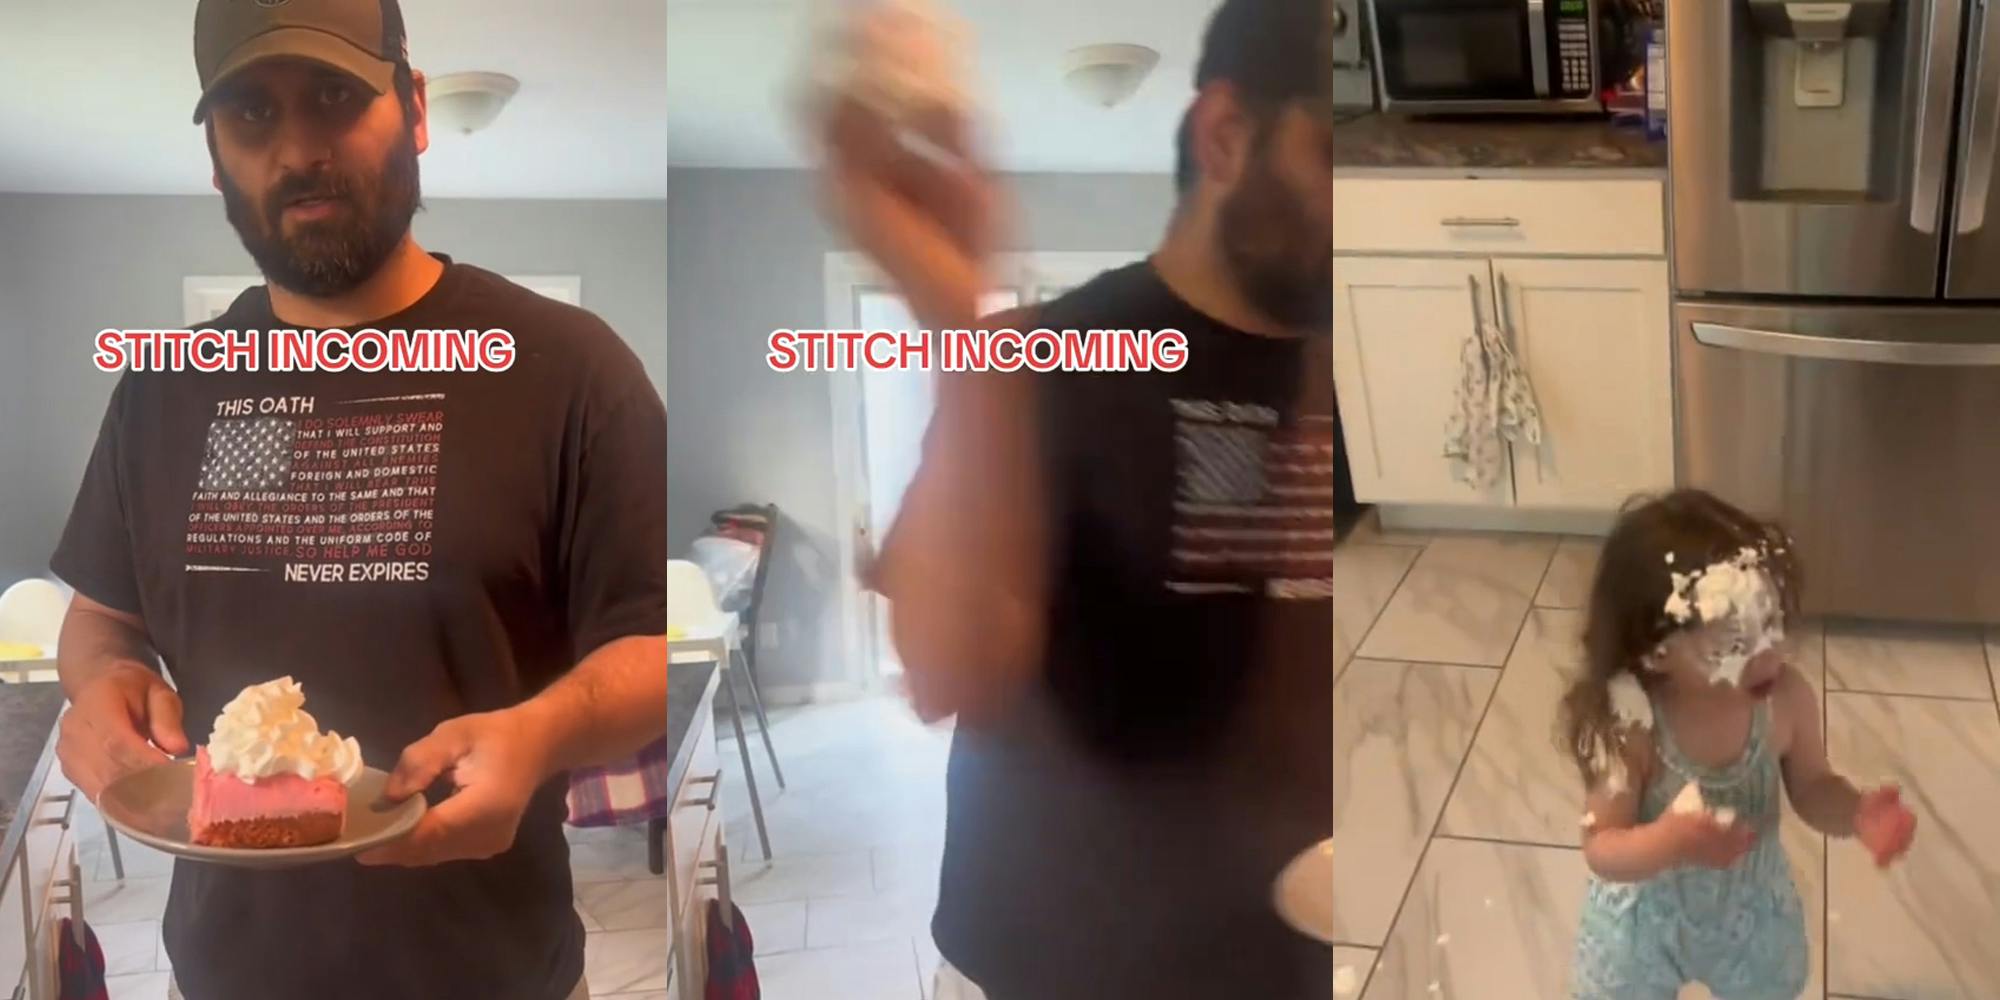 man holding cake with caption "STITCH INCOMING" (l) man throwing cake with caption "STITCH INCOMING" (c) little girl covered in cake in kitchen (r)